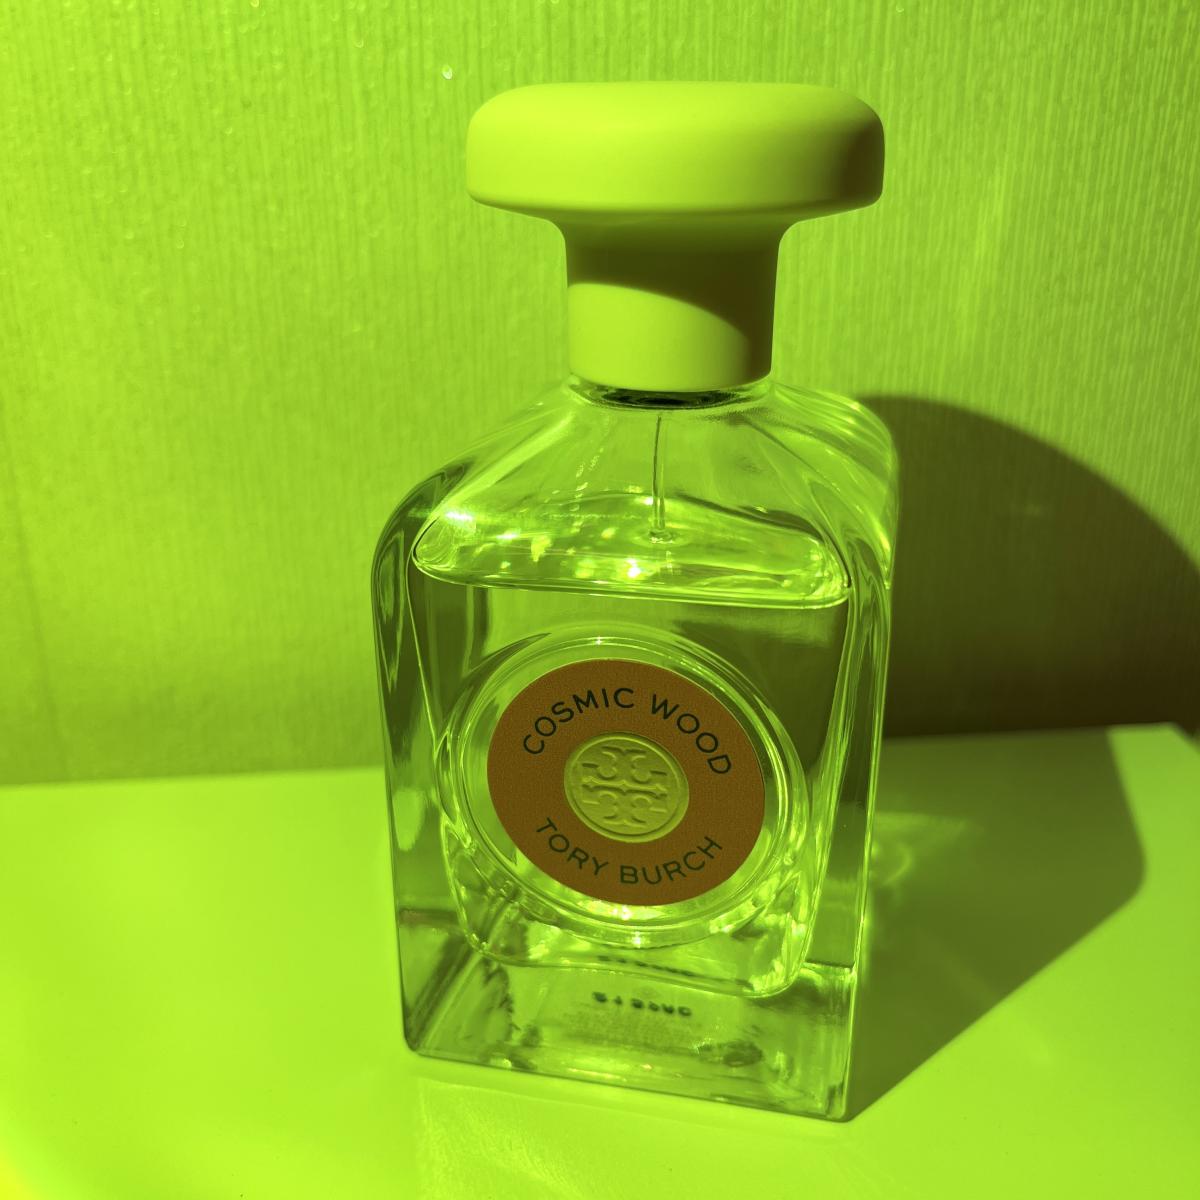 Cosmic Wood Tory Burch perfume - a new fragrance for women 2022